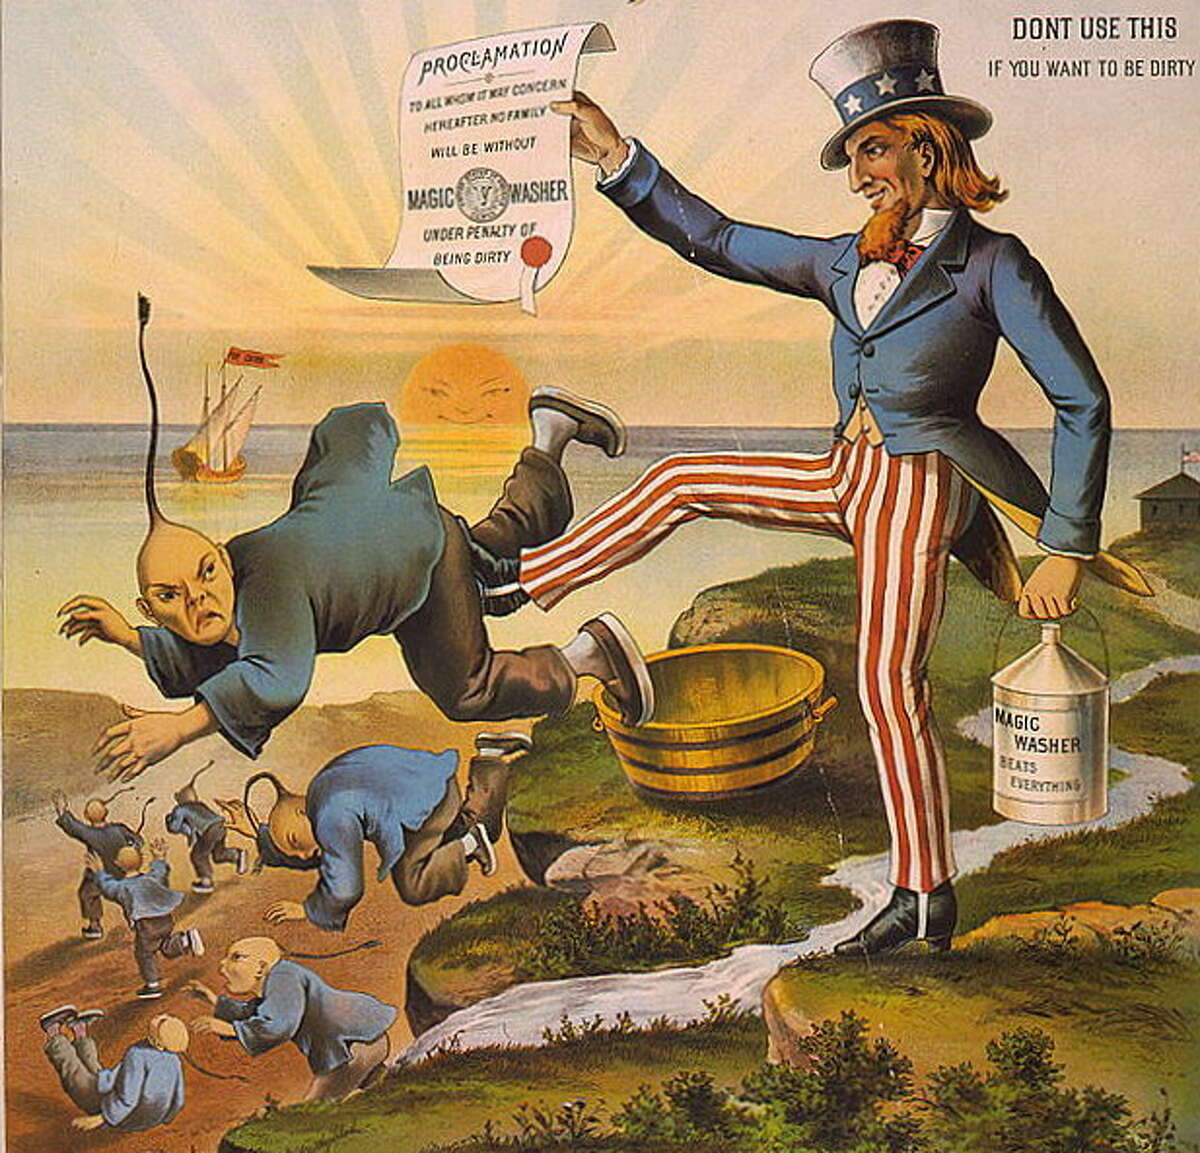 A racist "political cartoon" poster by George Dee Magic Washing Machine Company refers to the 1882 Chinese Exclusion Act while promoting its "George Dee Magic Washer." The manufacturers clearly hoped the machine would displace Chinese laundry operators.